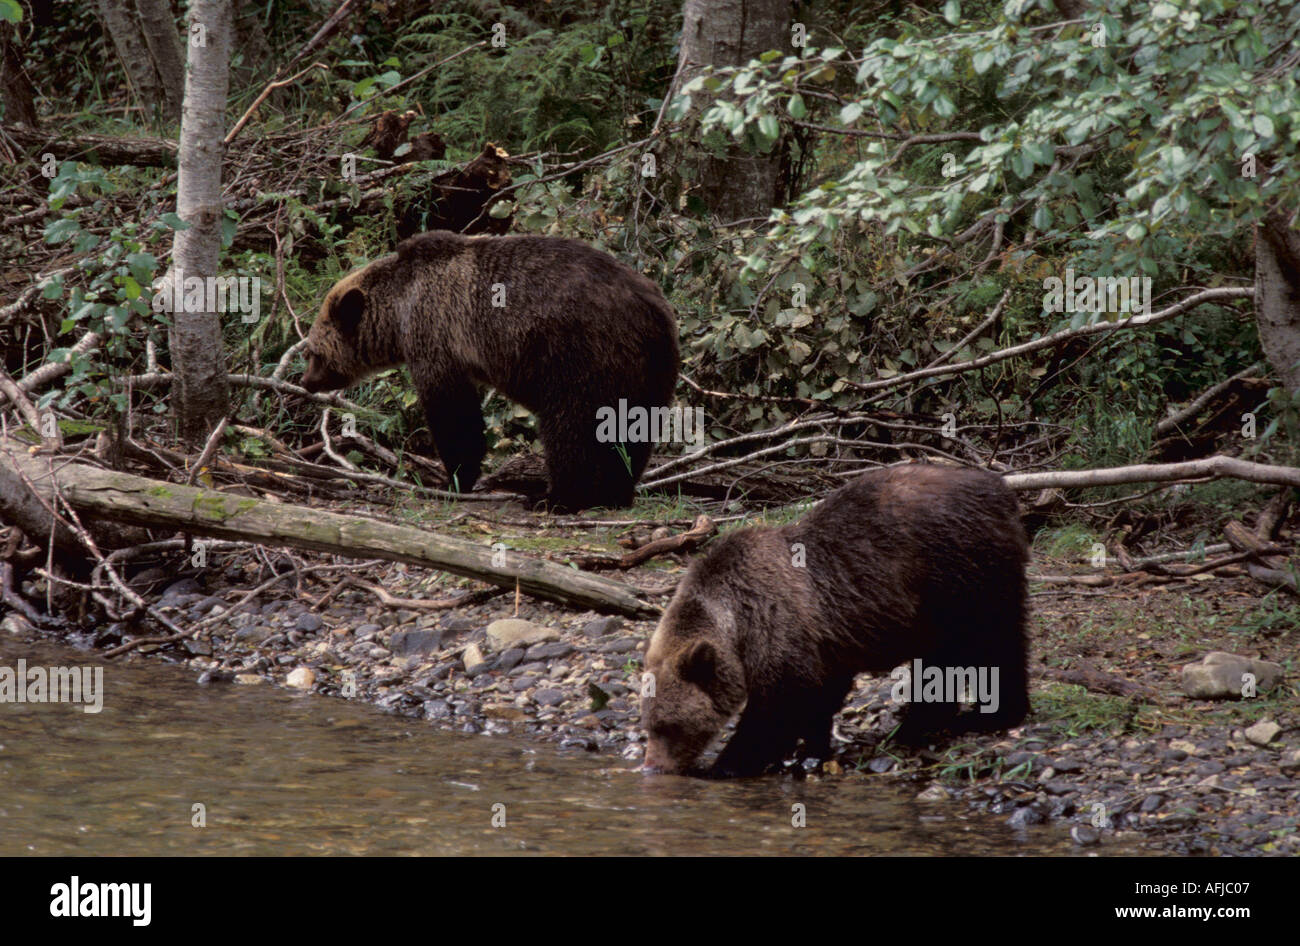 Grizzly Bear Ursus arctos at rivers edge Canada Stock Photo